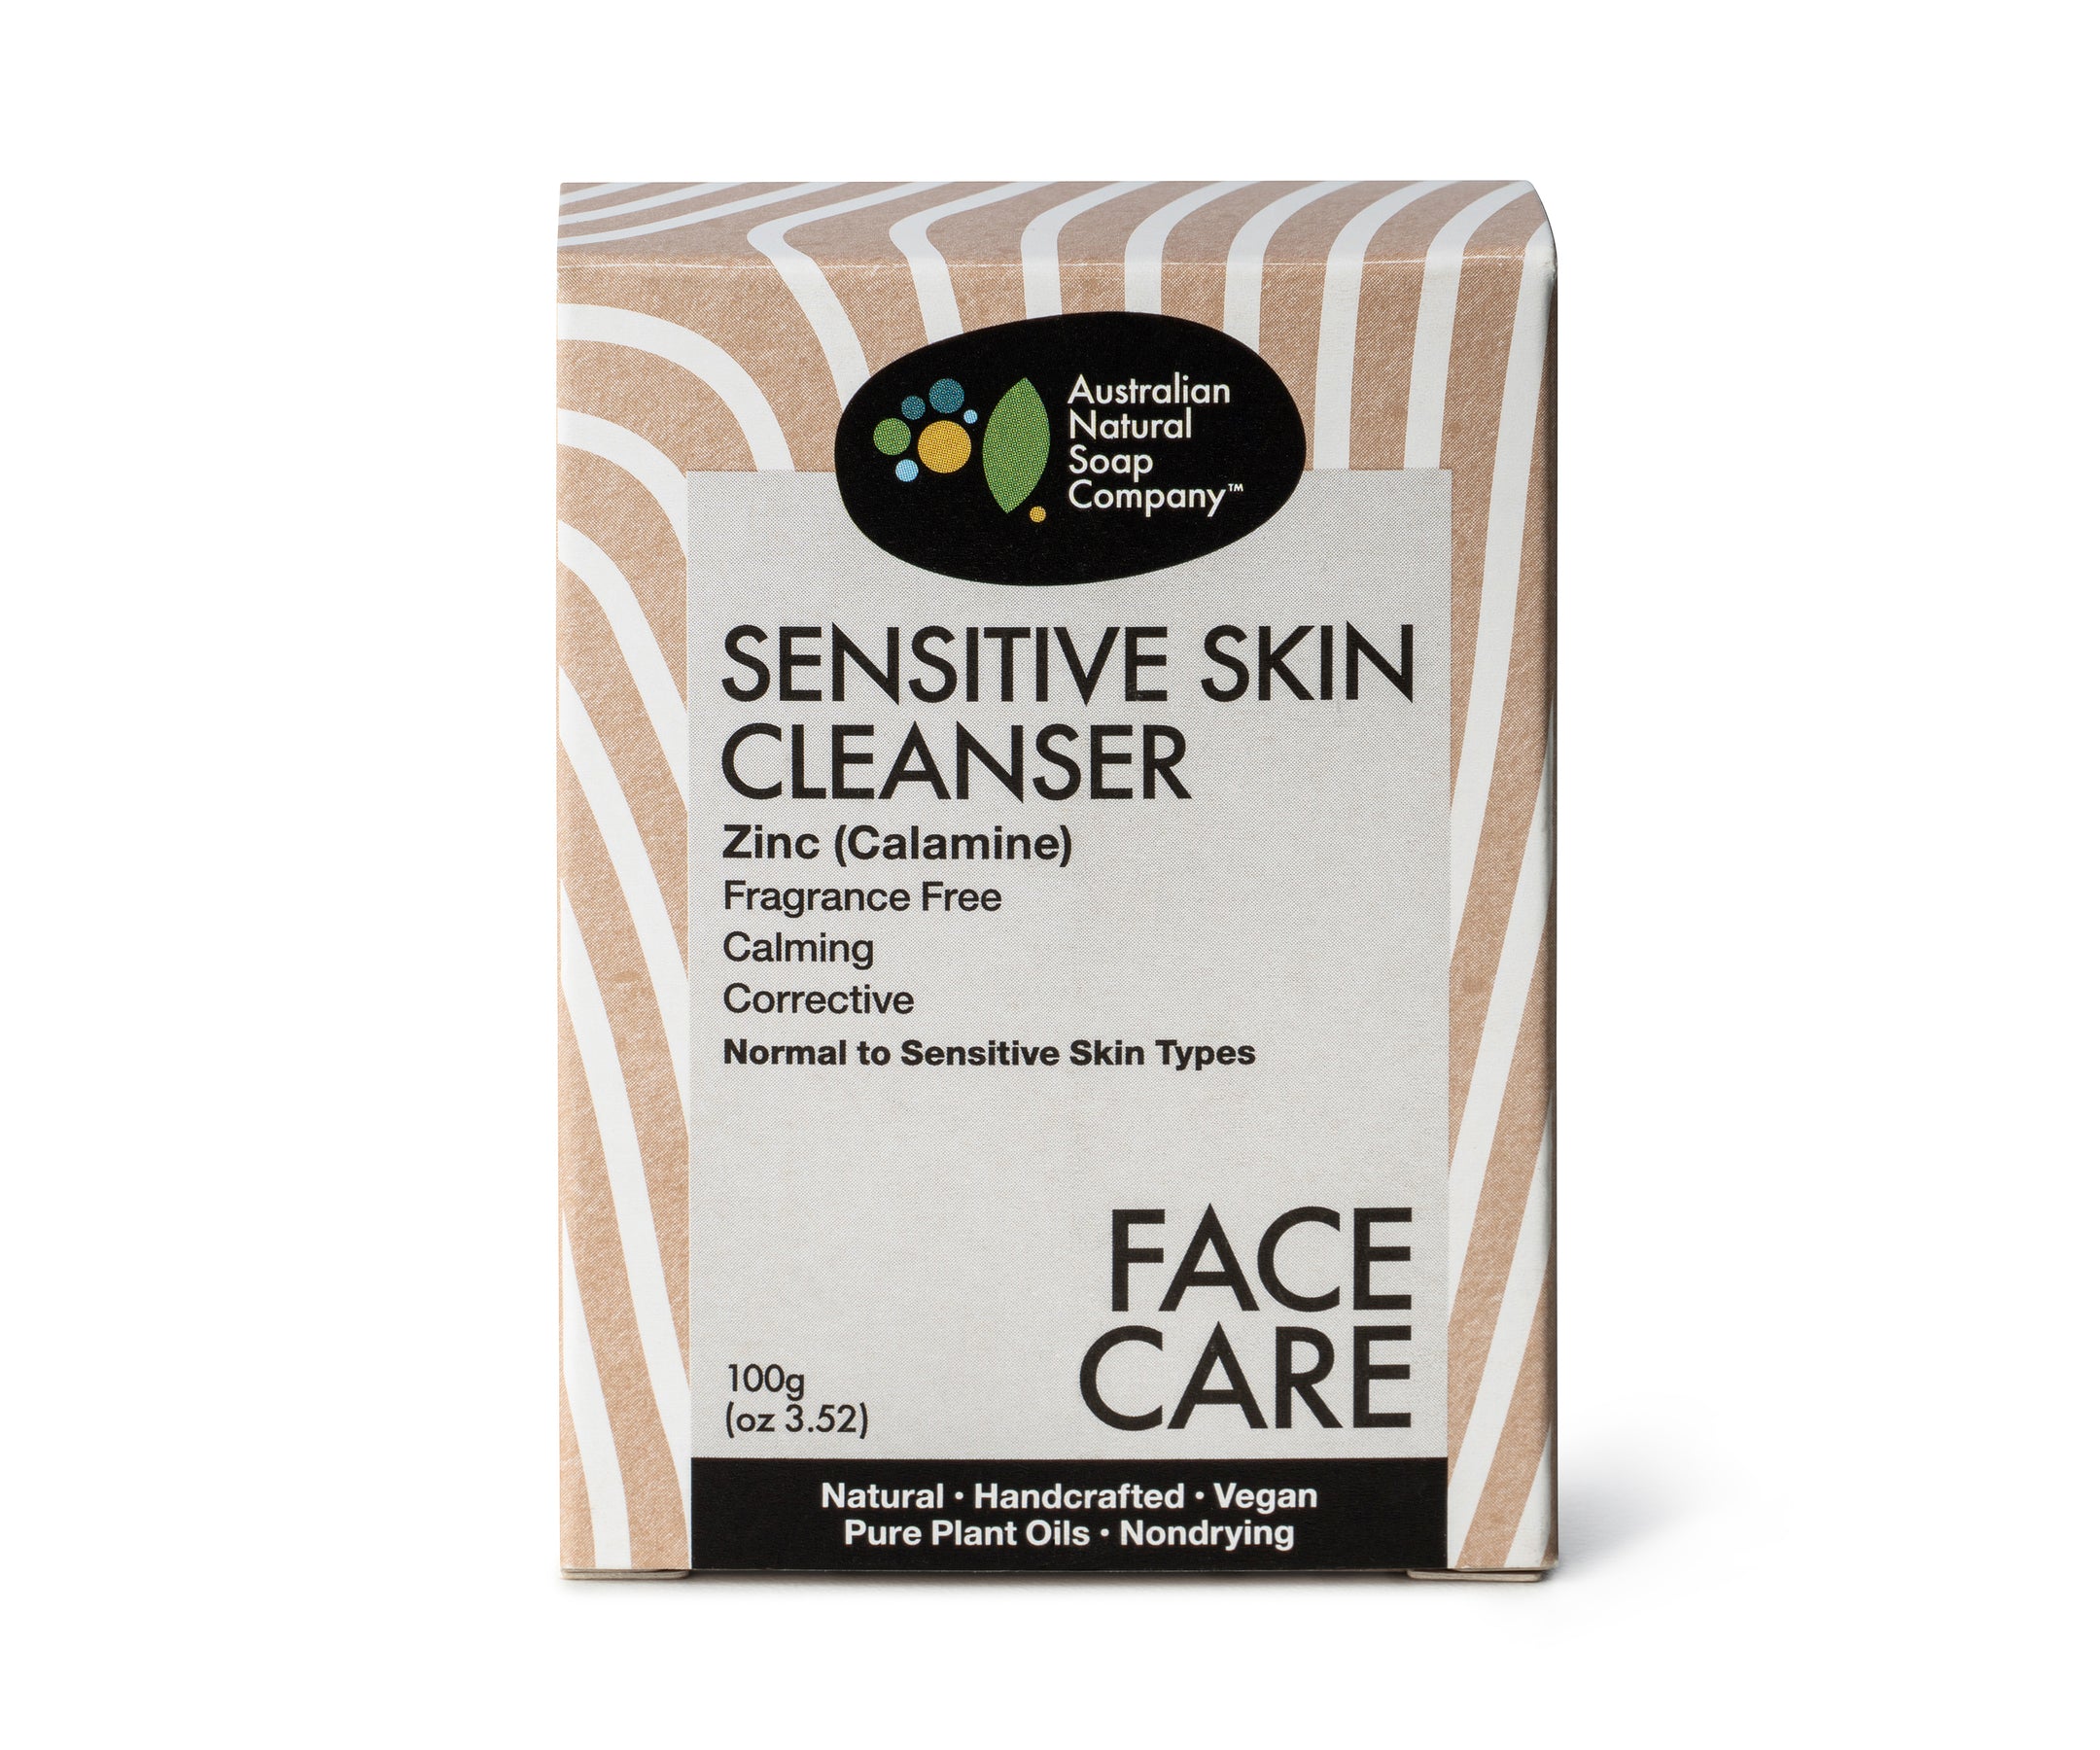 Australian Natural Soap Company sensitive skin face and body cleansing bar 100g front of box